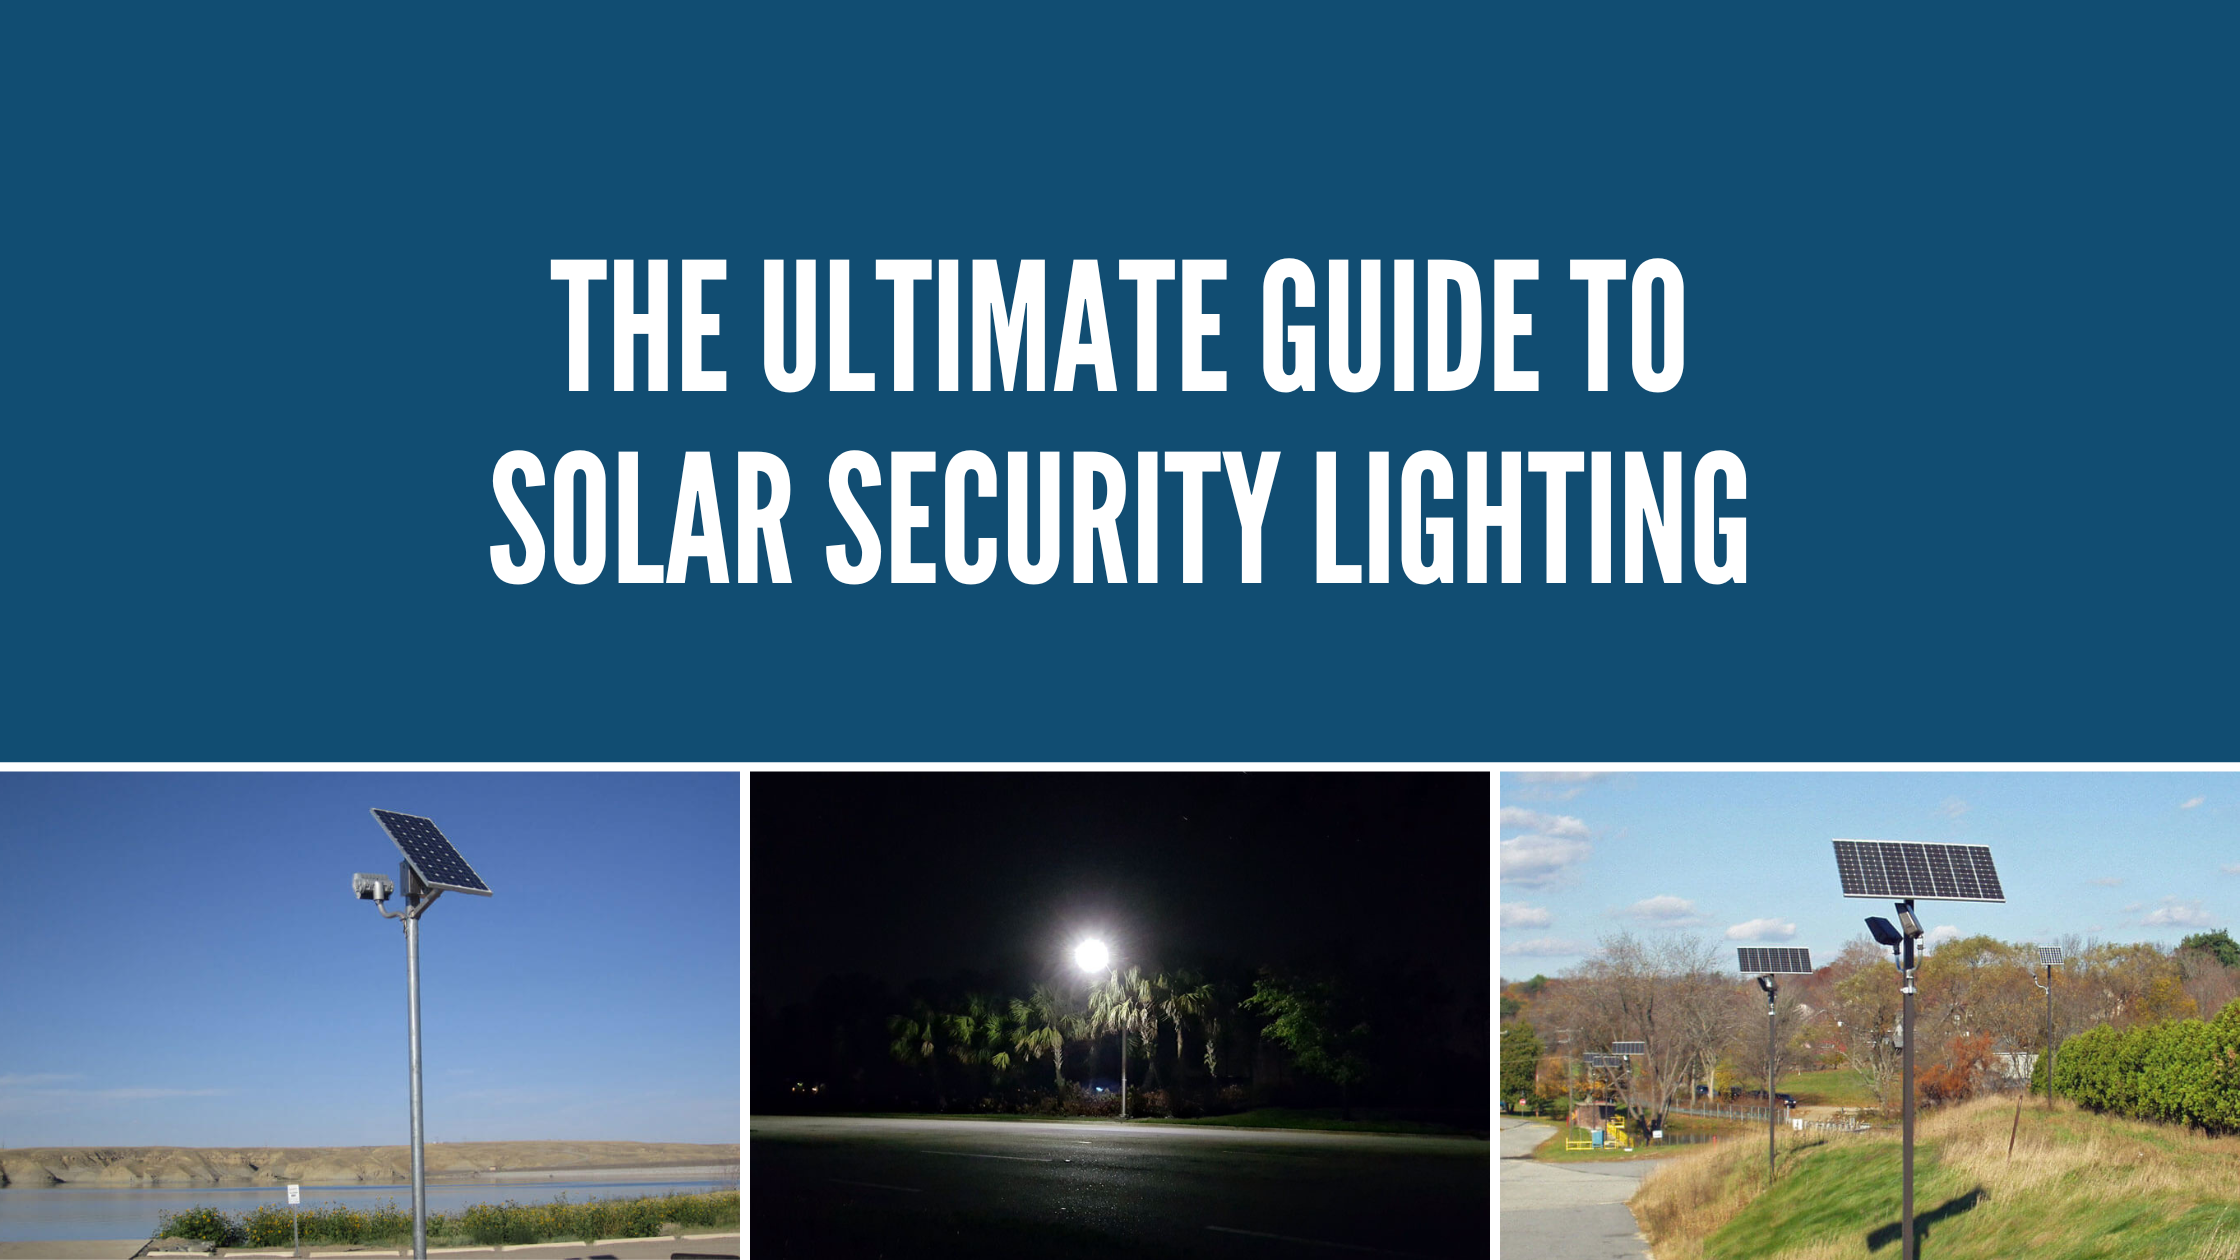 The Ultimate Guide to Solar Security Lighting